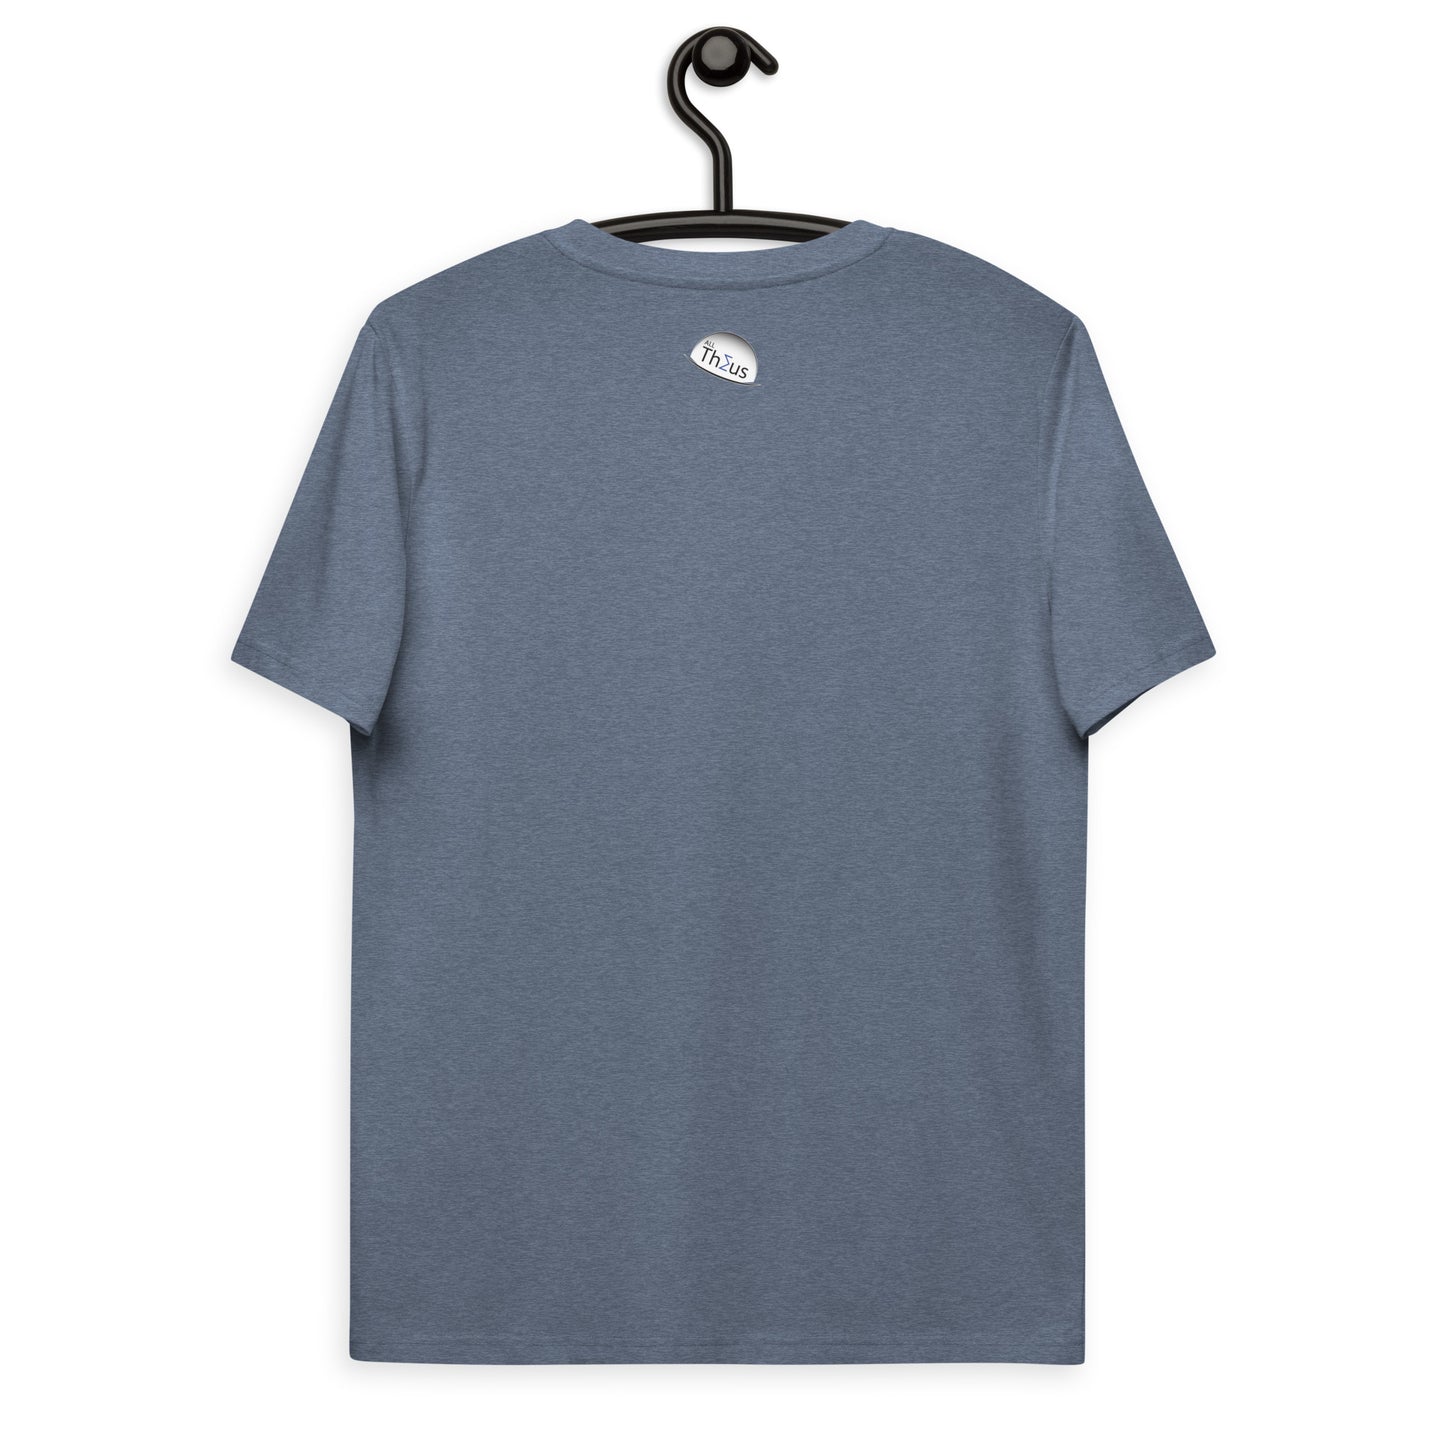 Unisex organic cotton t-shirt - Topology Has The Most Hol(E)y and Shapely Nerds